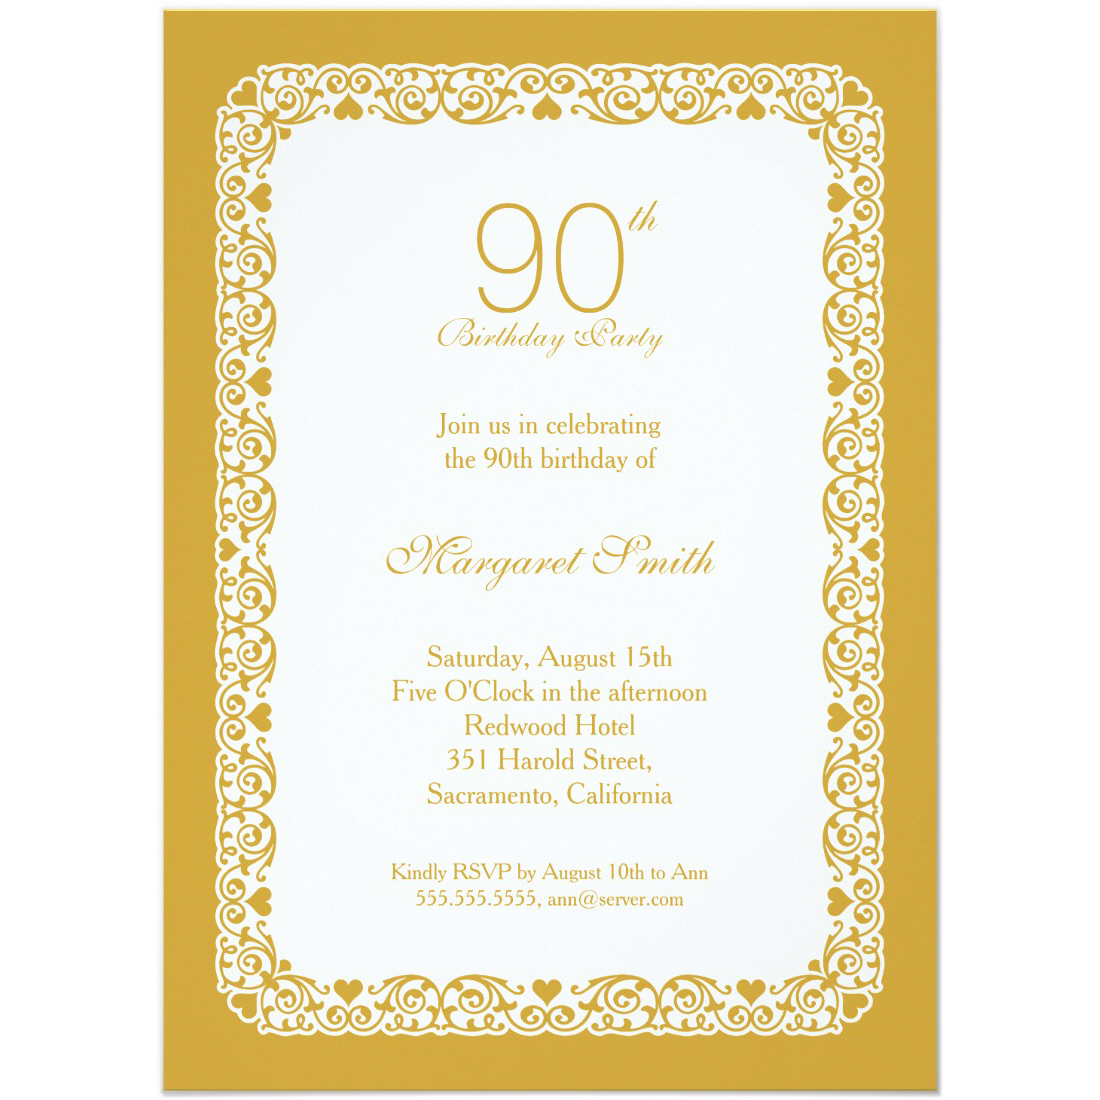 90th Birthday Party Invitations Templates • Business Template Ideas